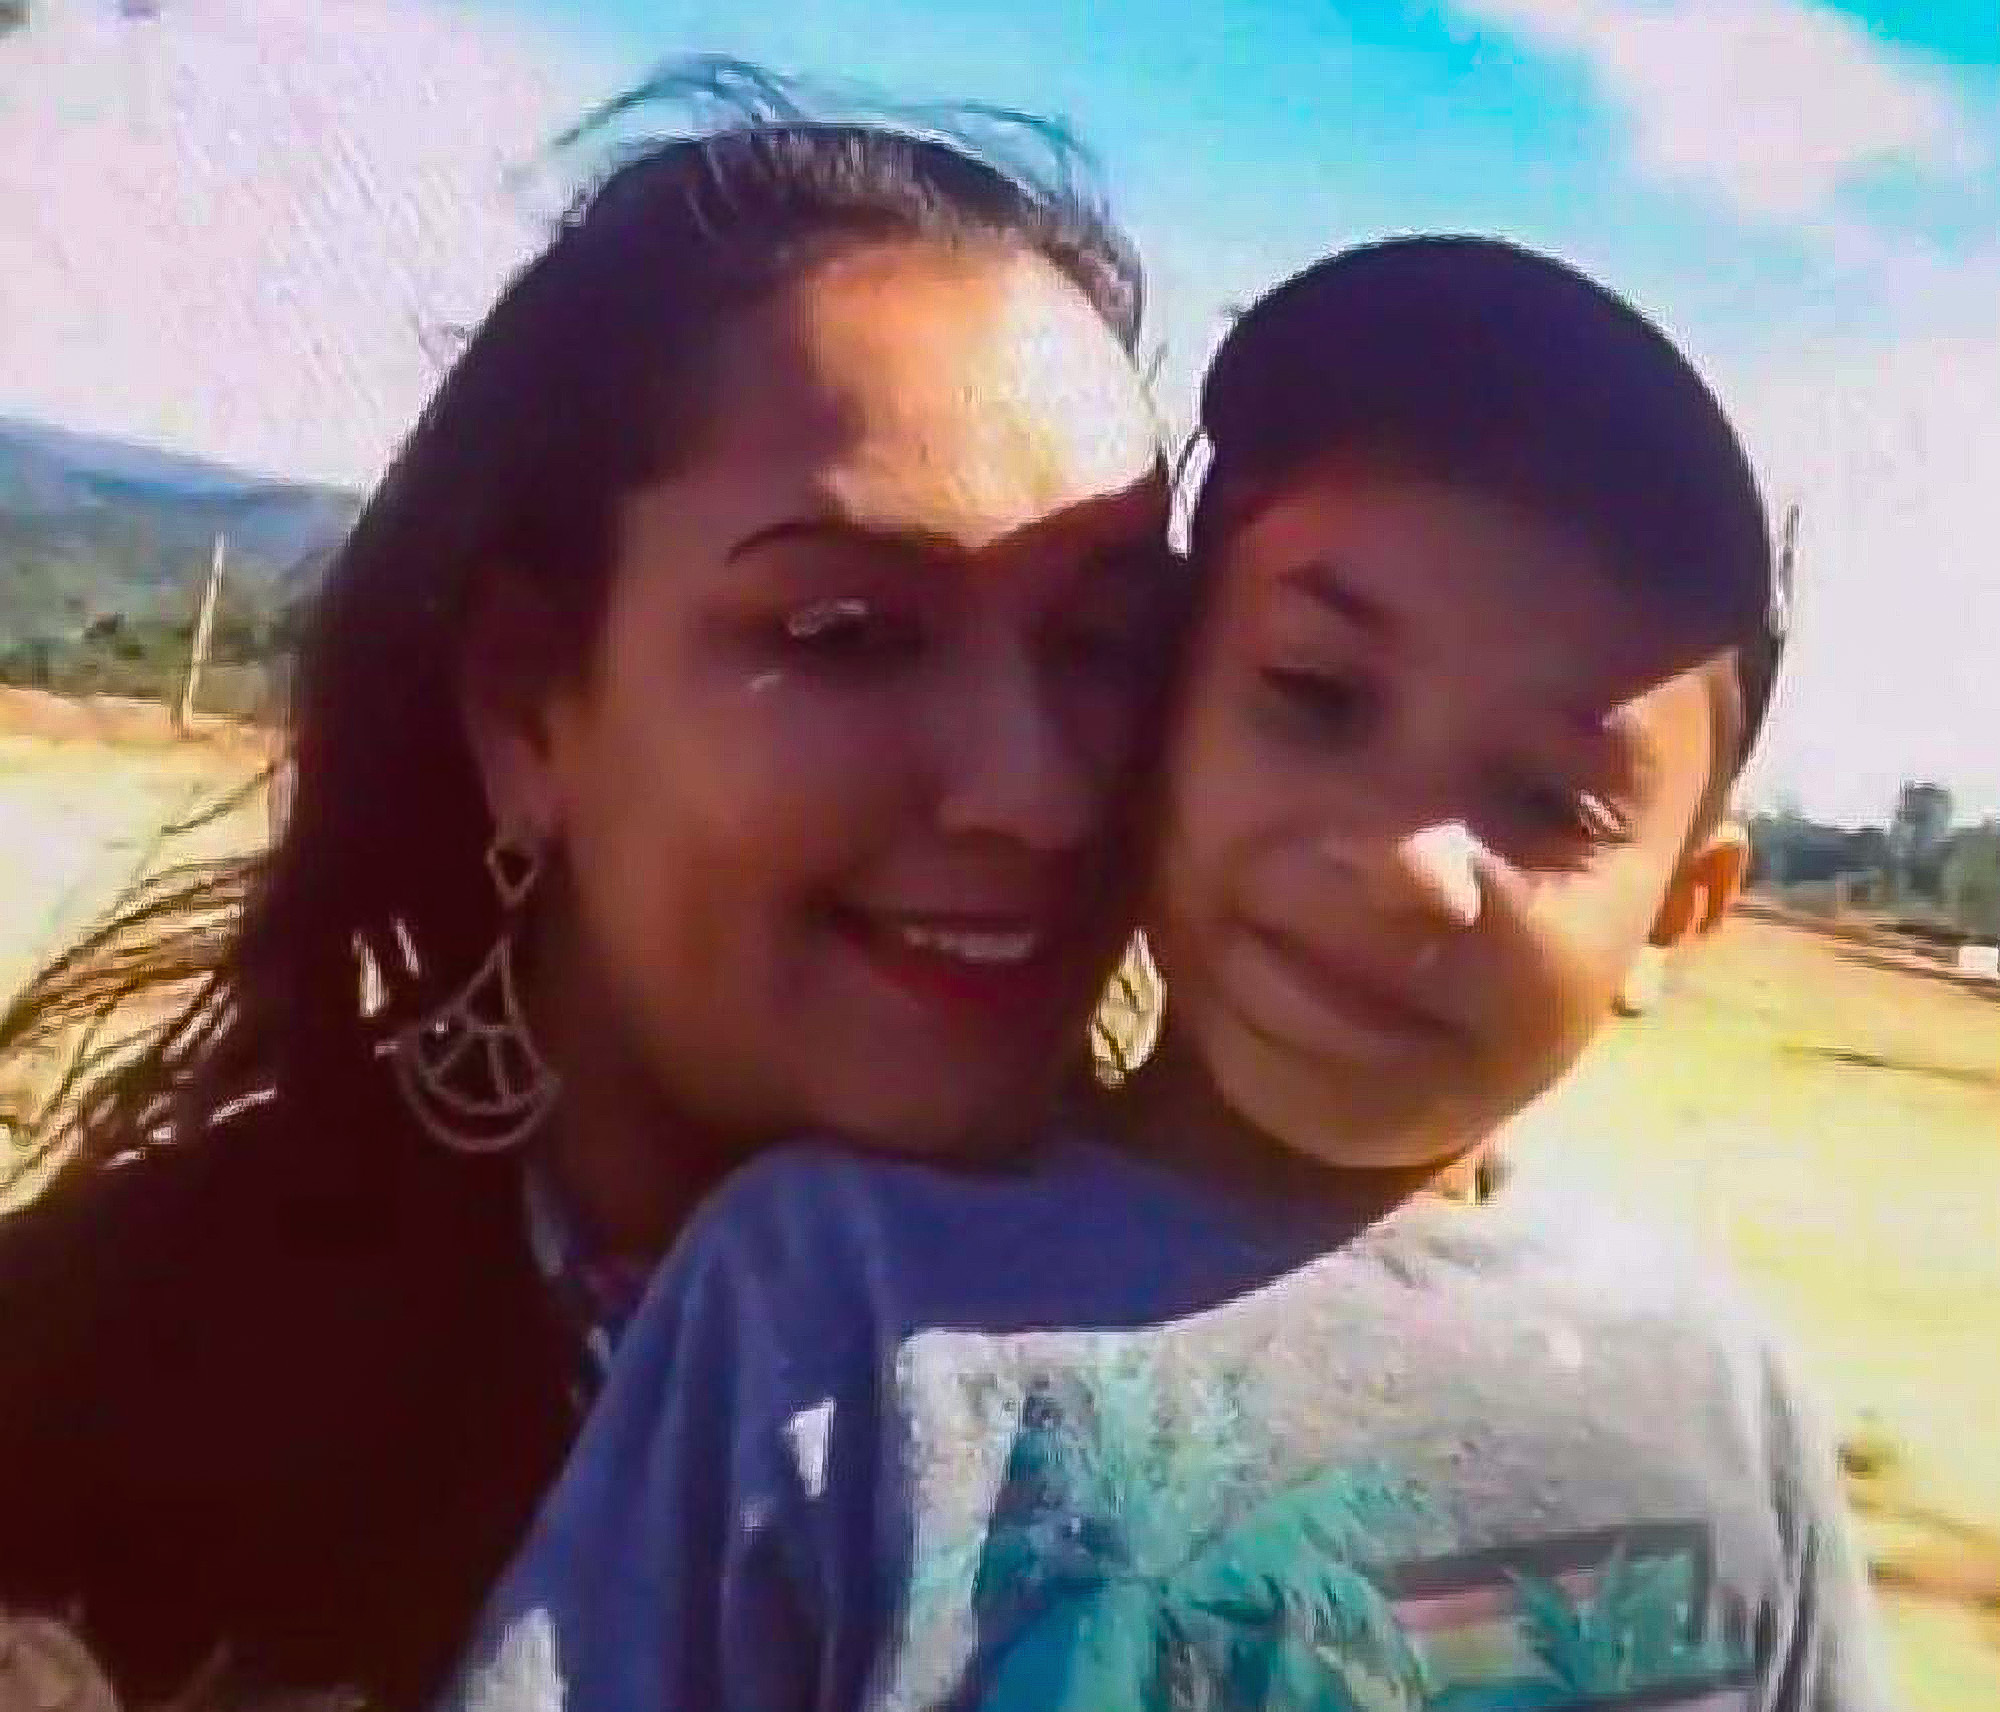 Read more about the article Pregnant Mum Suffocated Son, 7, With Plastic Bag In Front Of Other Kids Because He Was Naughty